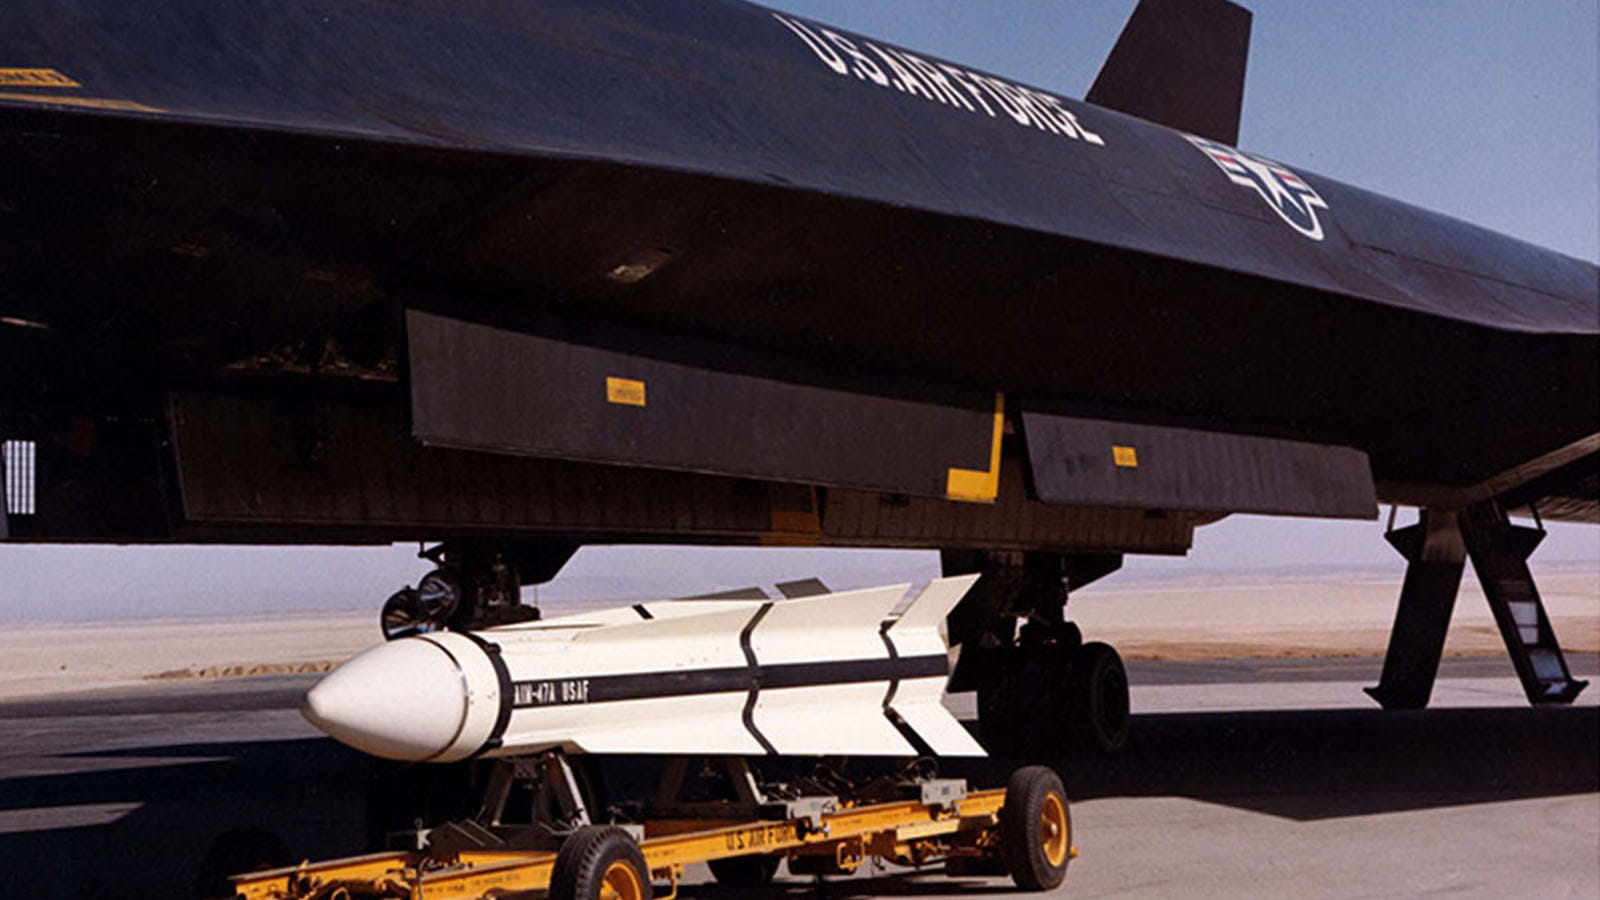 AIM-47 missile waiting to be loaded into the Lockheed YF-12A Blackbird. 